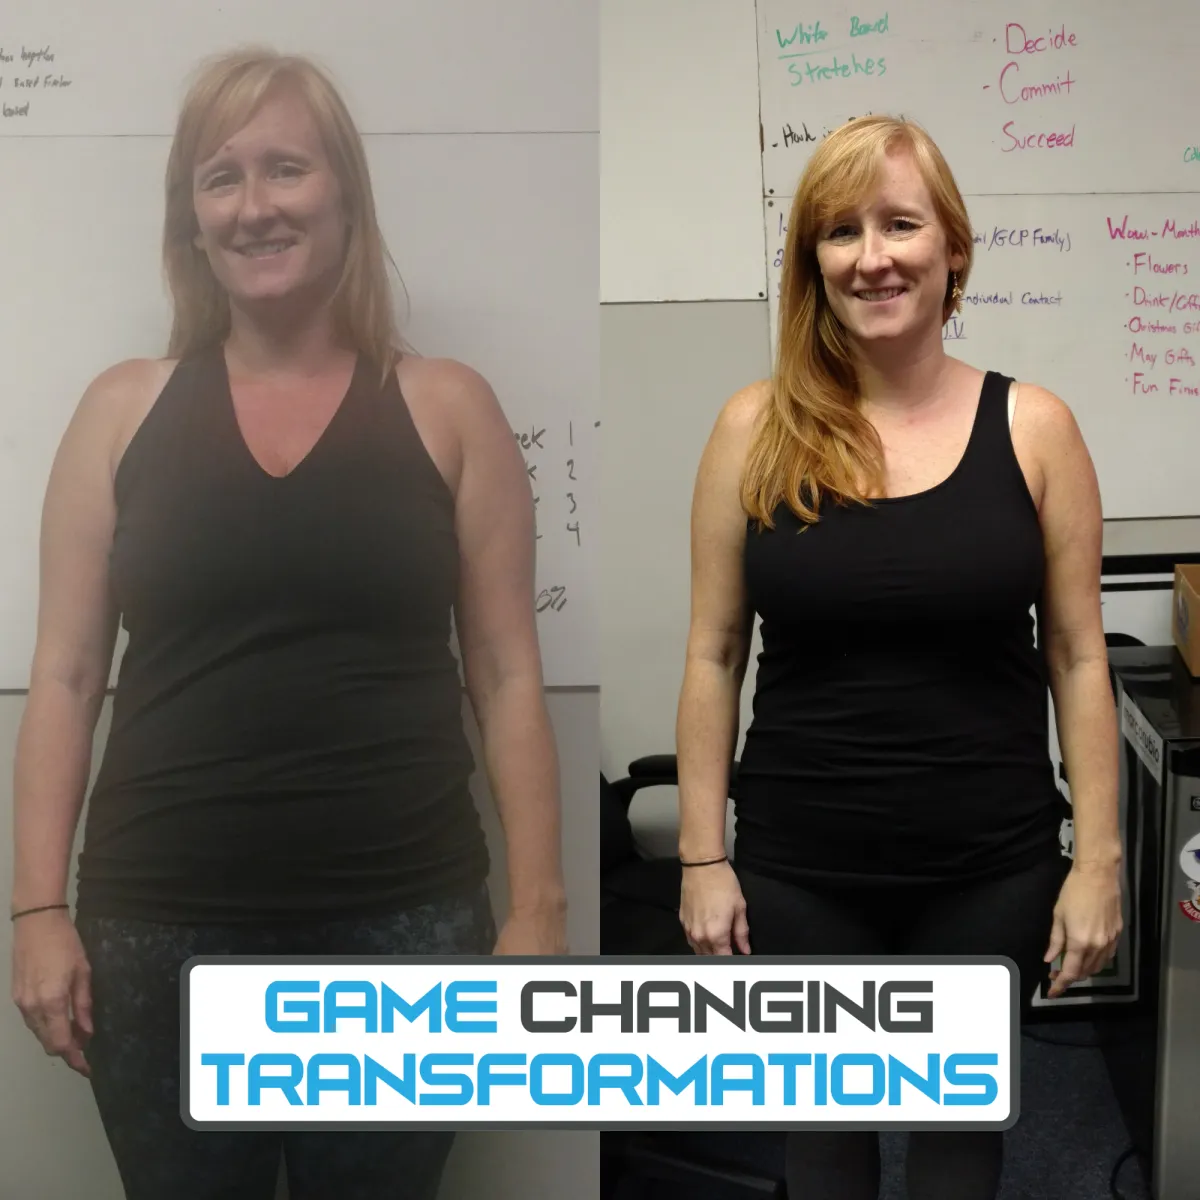 Losing 20 pounds of weight is normal at Game Changing Performance near Wauconda IL